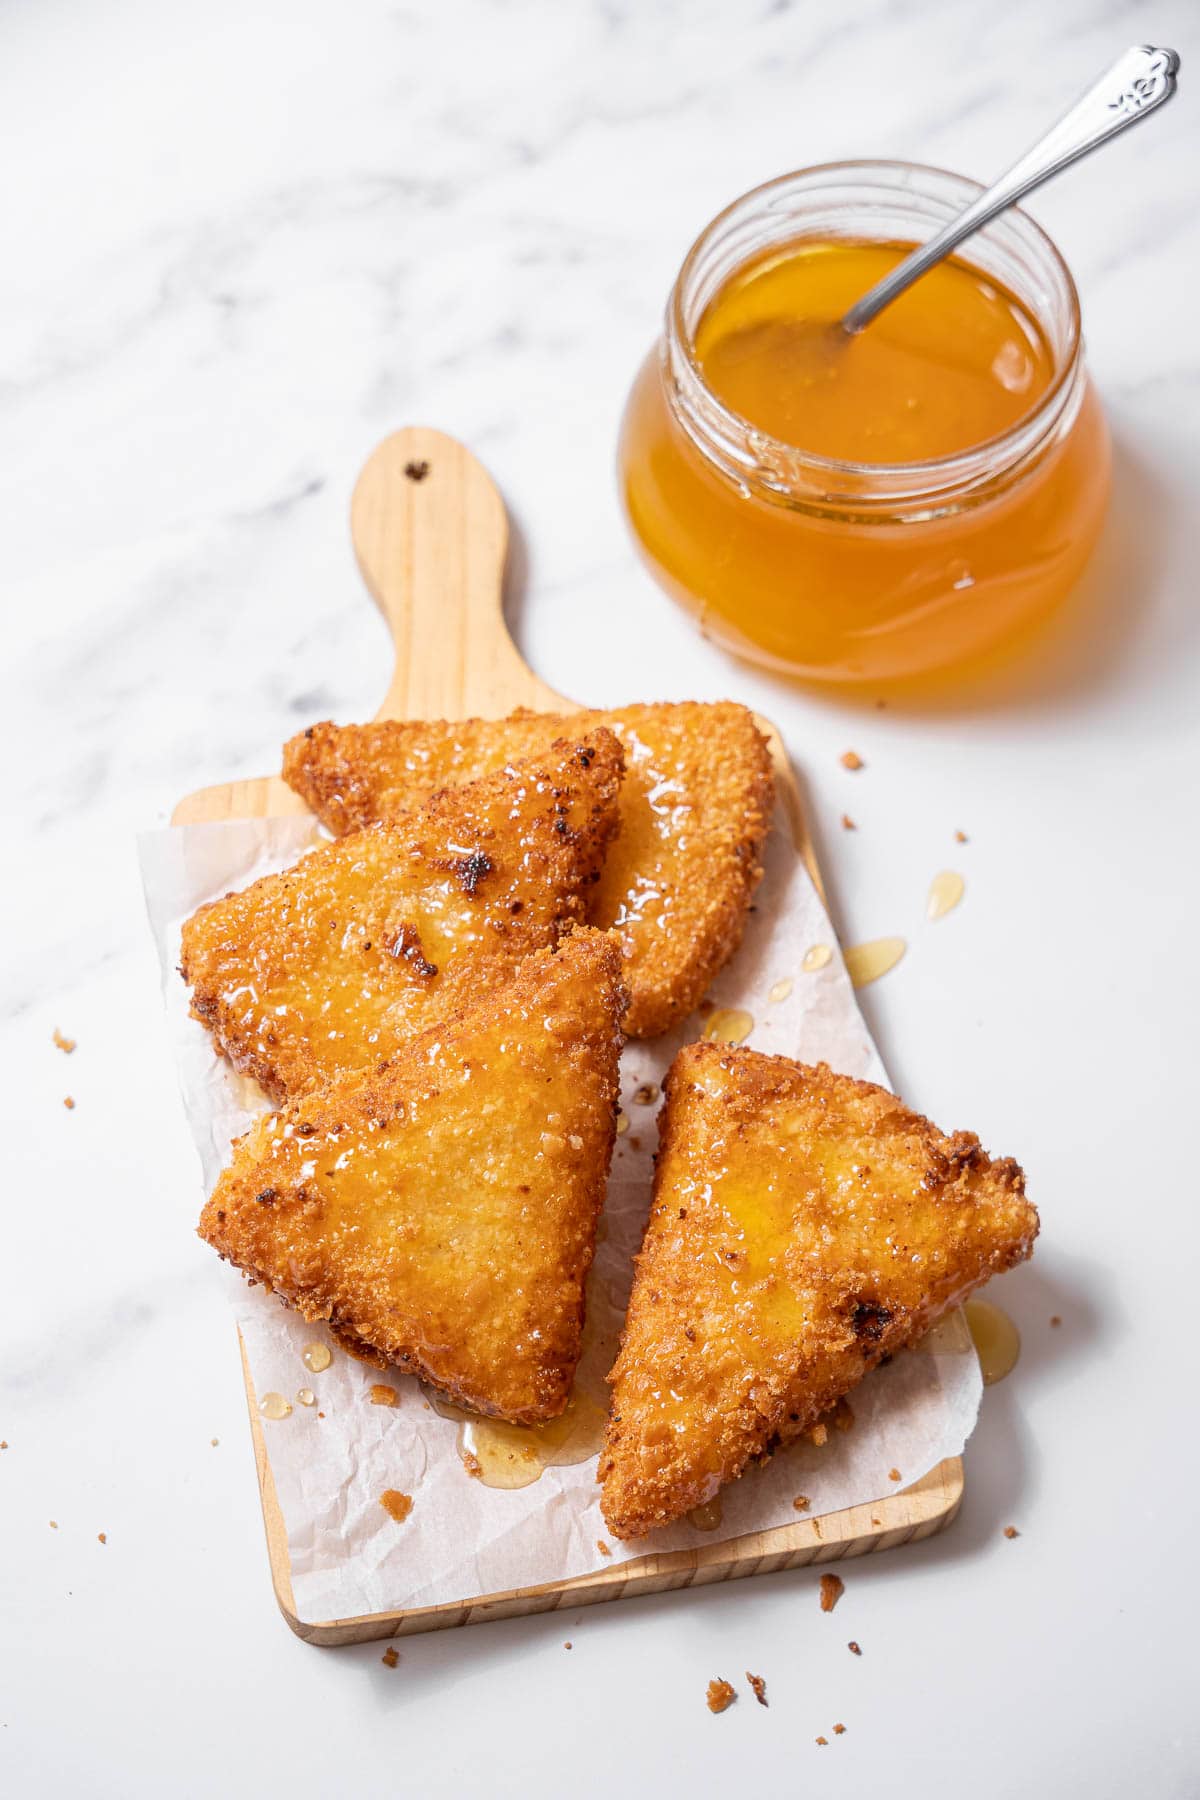 four slices of fried goat cheese with honey.